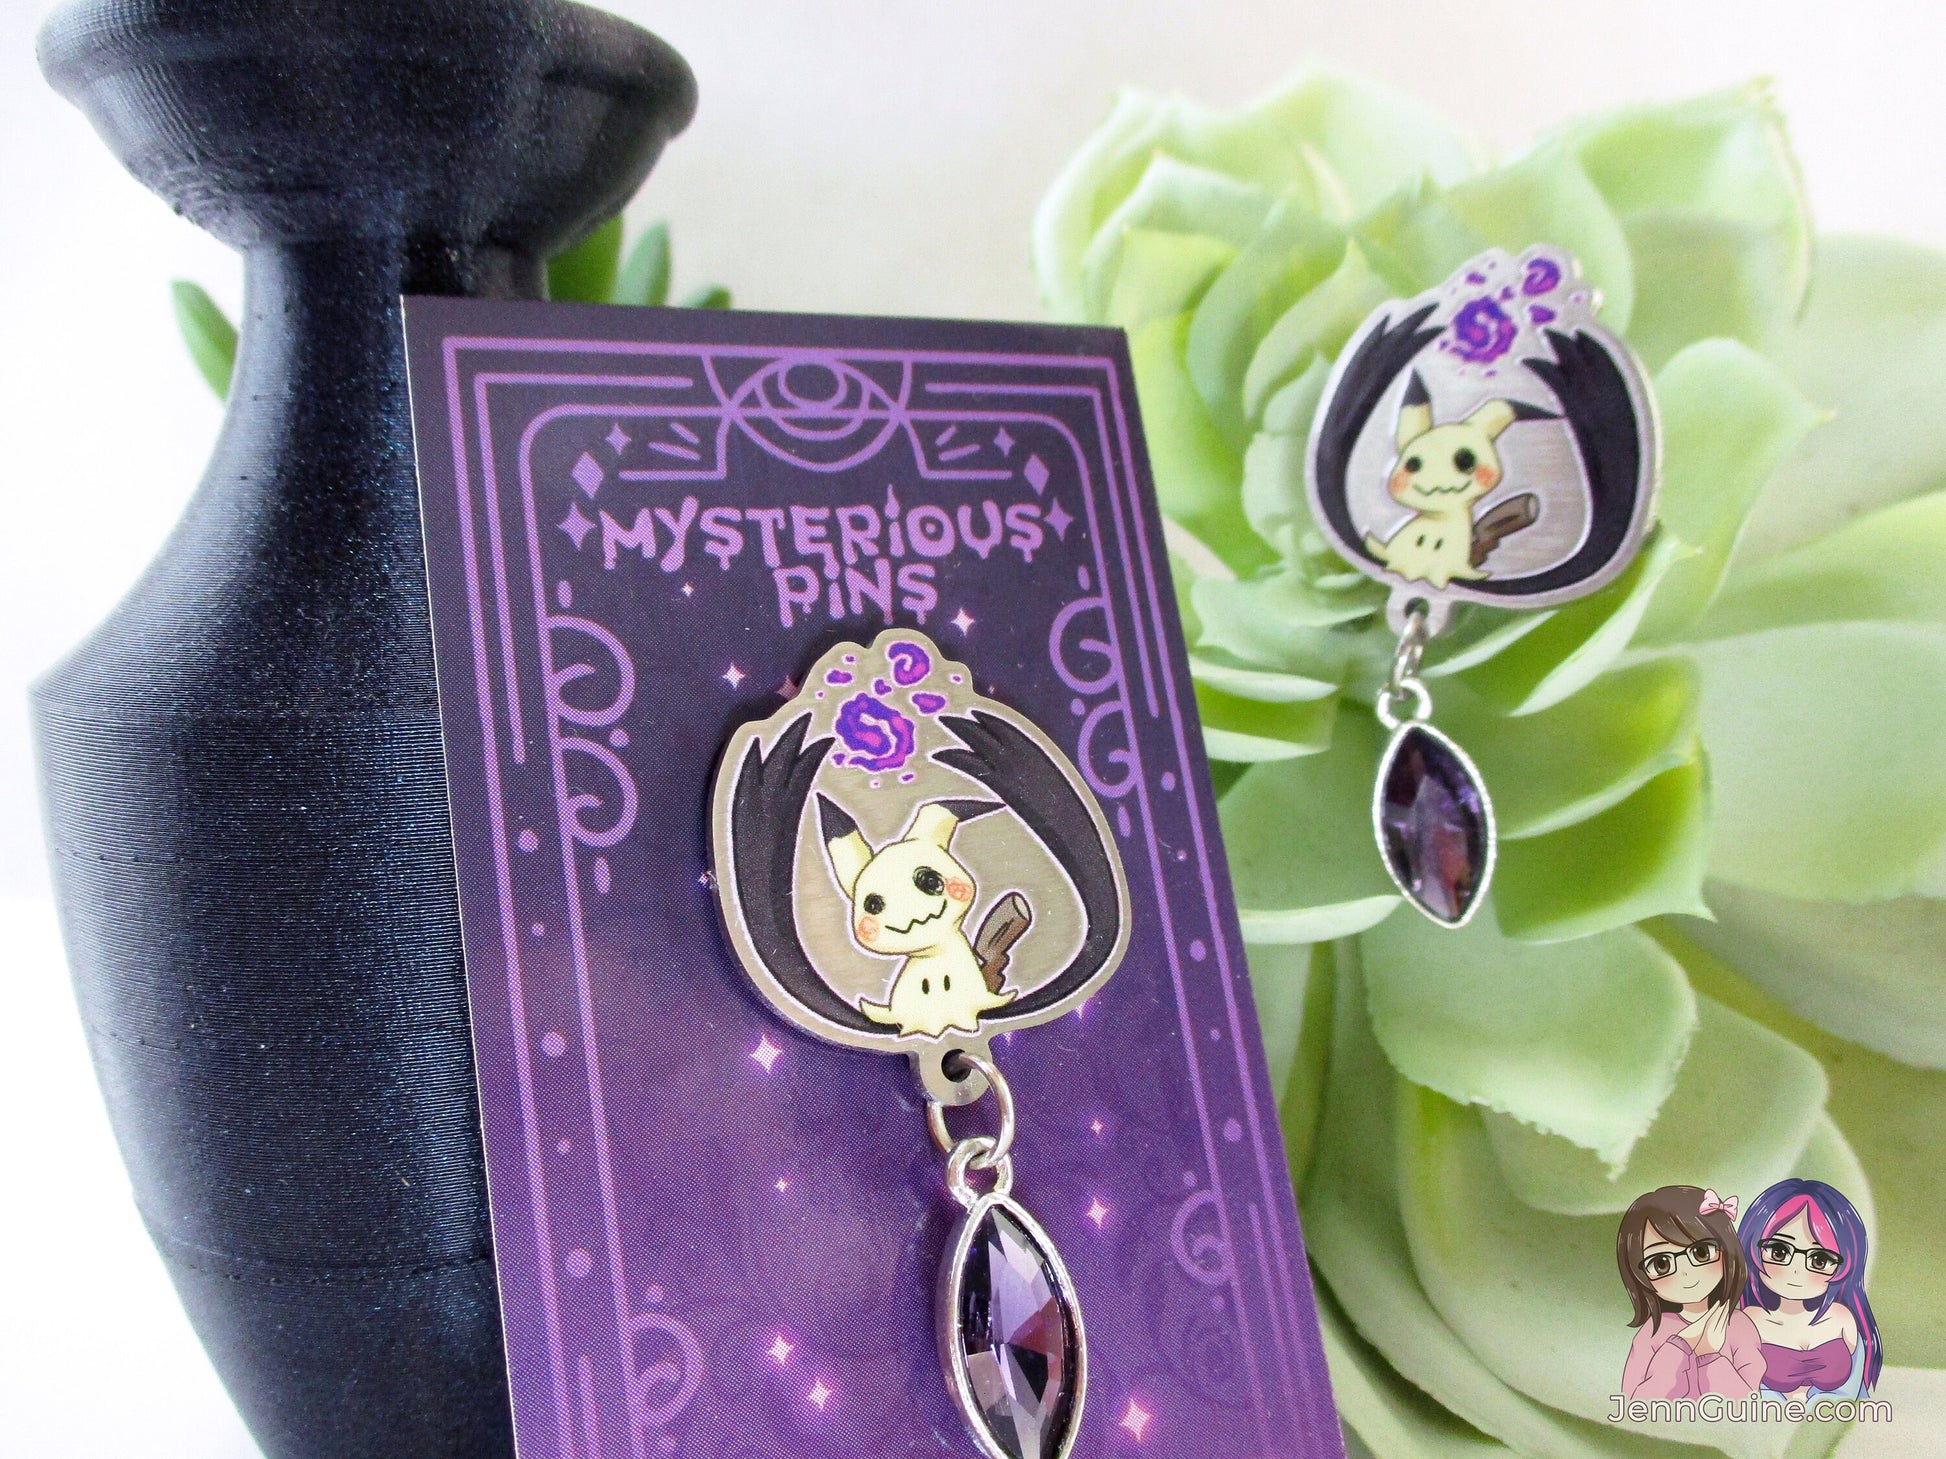 Mimikyu Ghost PKMN Spooky Halloween Eco Stainless Steel Metal Pin with Blue Crystal - Not Enamel Pin - Limited Qty - Please read description